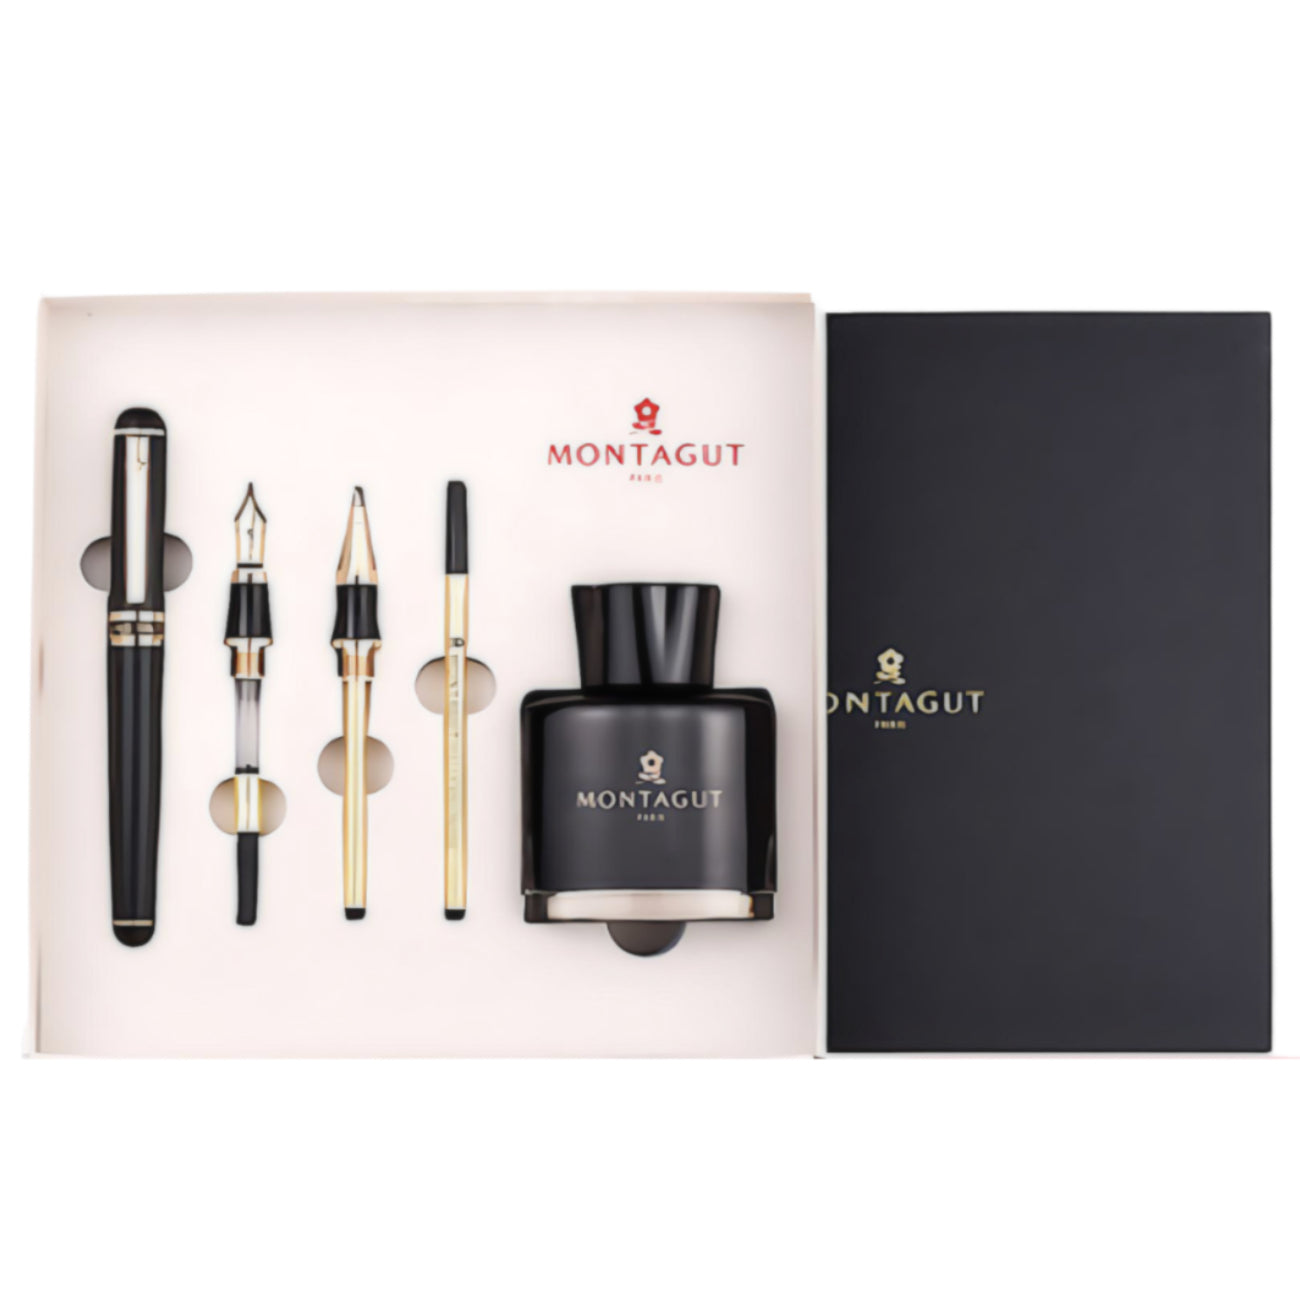 a Montagut Fountain Pen set in gold and matte black